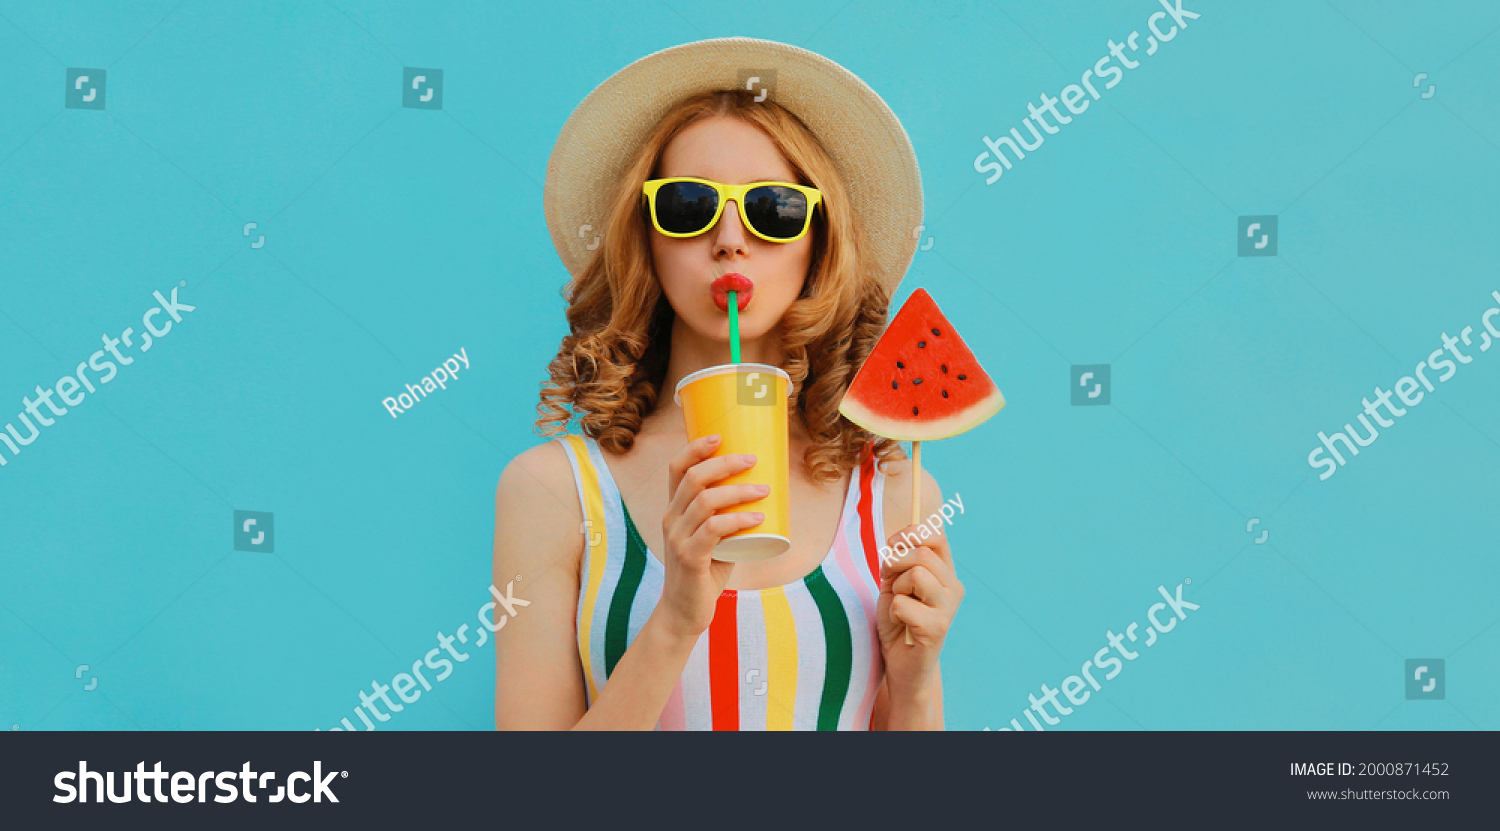 Summer fashionable colorful portrait of stylish young woman drinking juice with lollipop or ice cream shaped slice of watermelon wearing a straw hat on blue background #2000871452